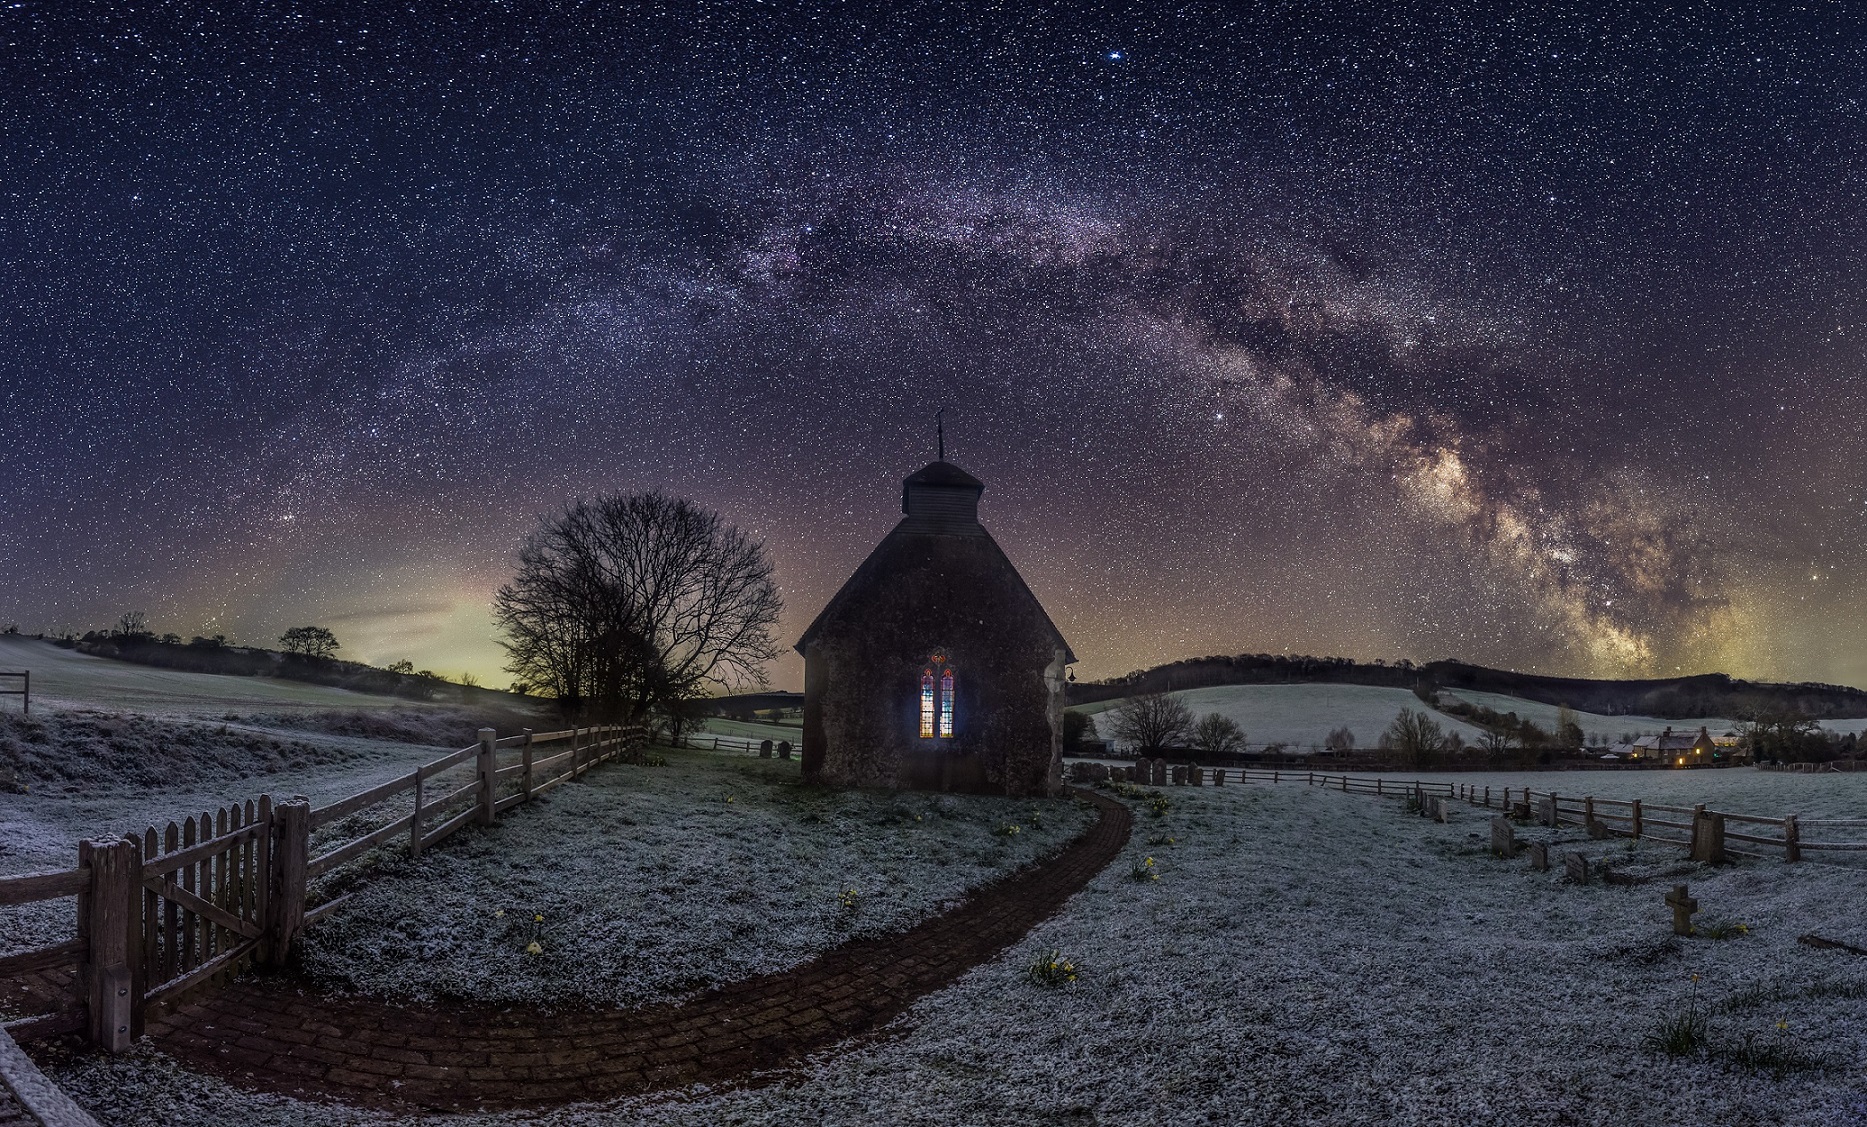 Embrace the darkness and win £100 as the South Downs National Park photo competition returns